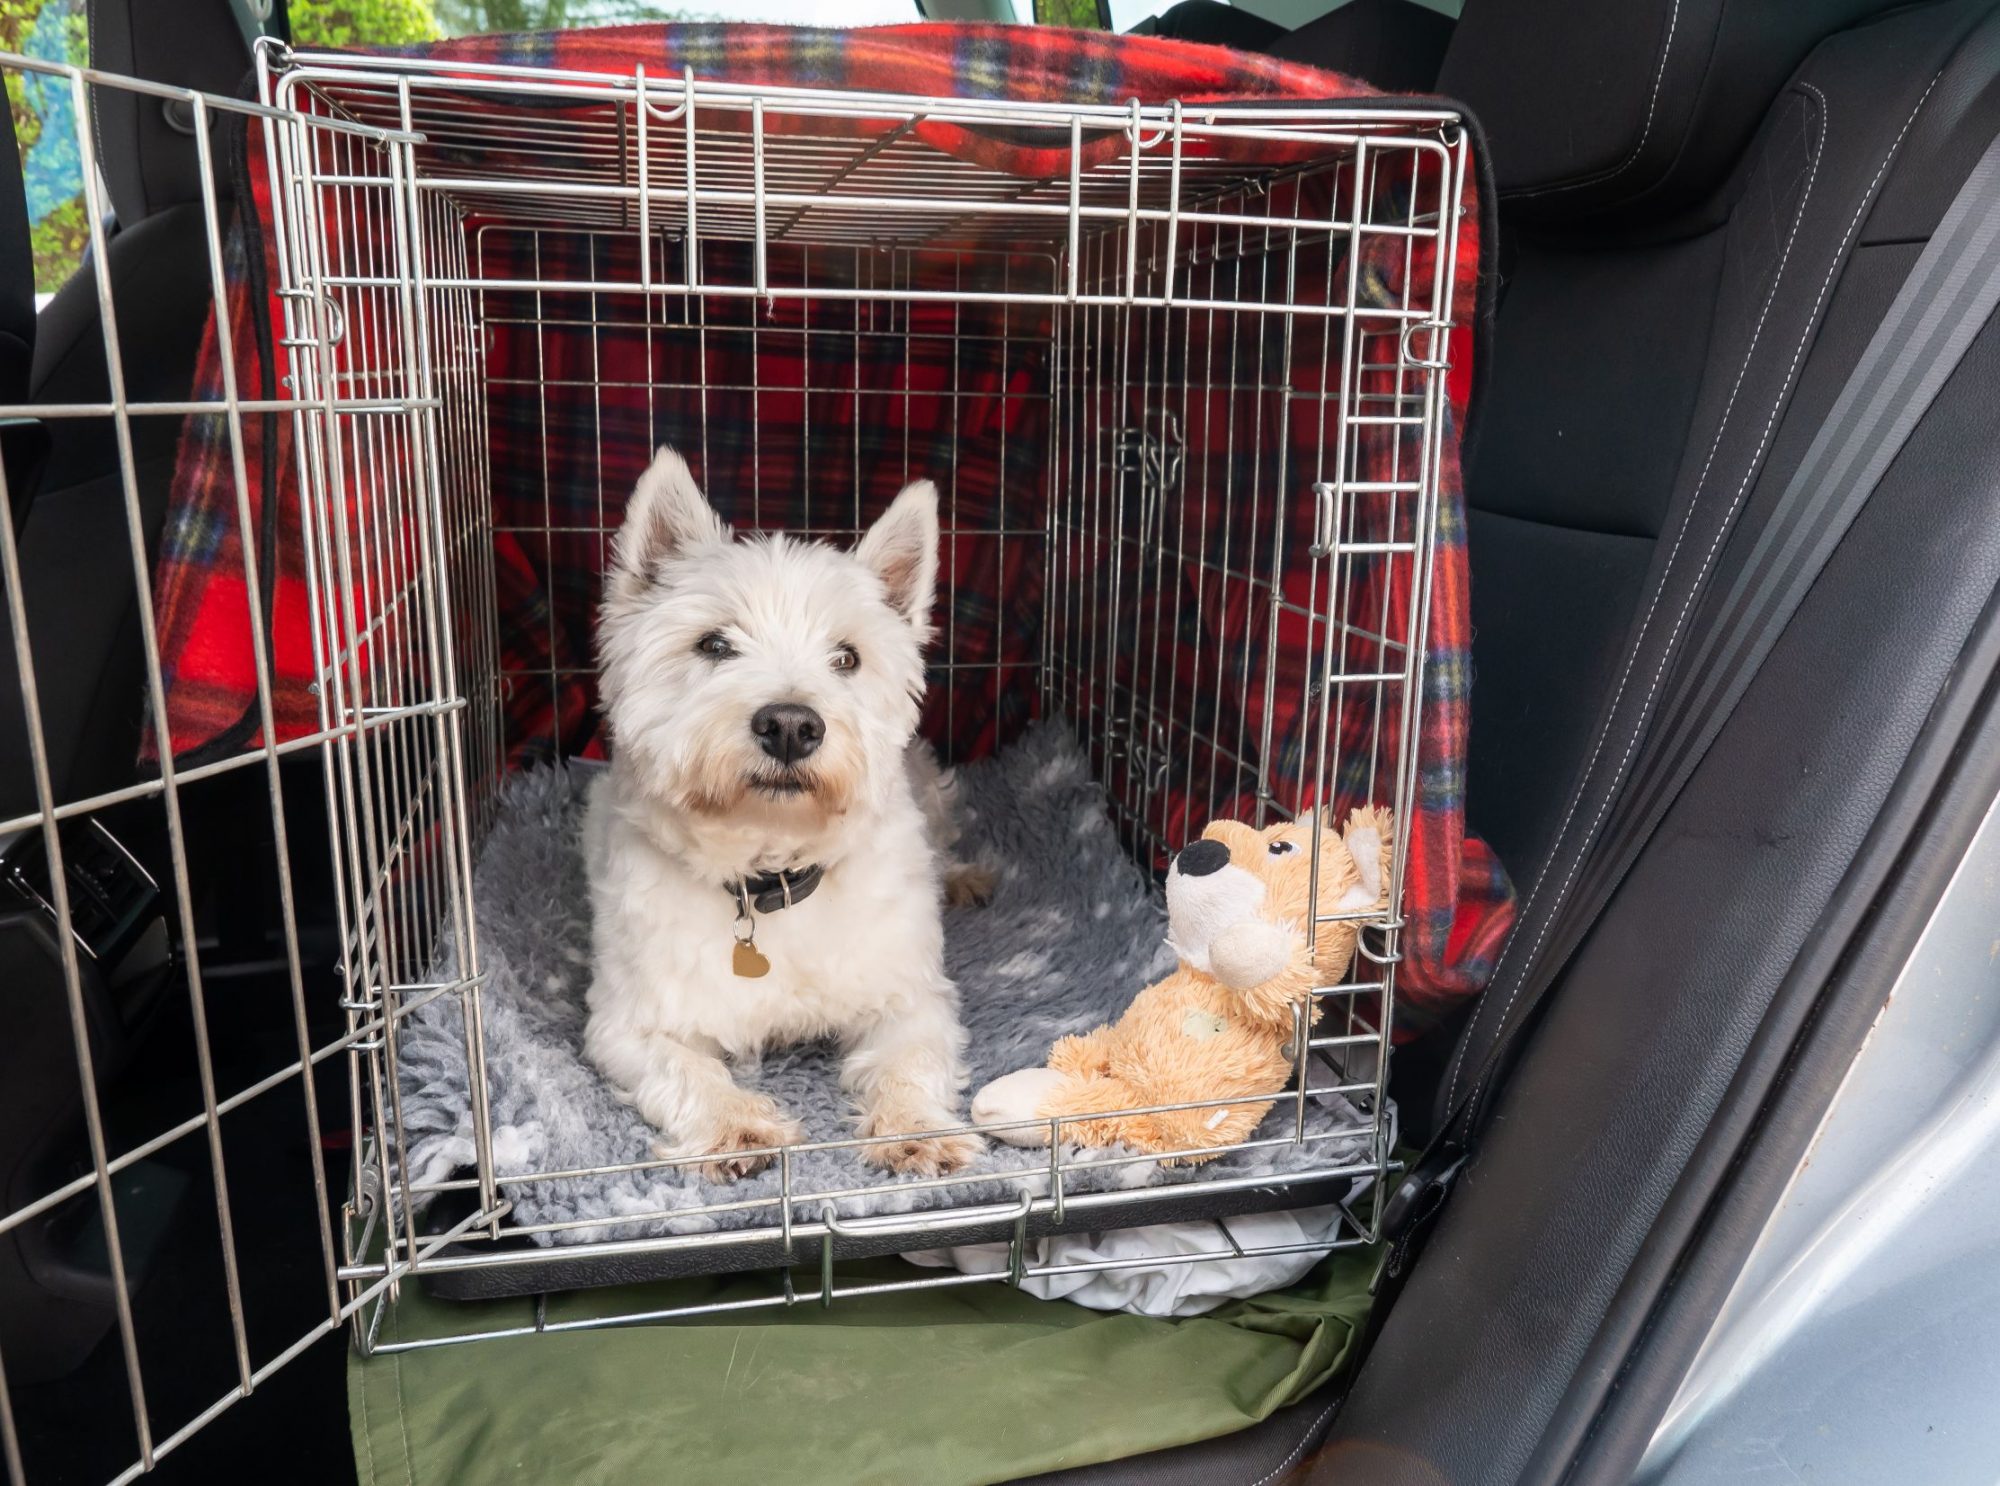 A pet traveling safely in a car.